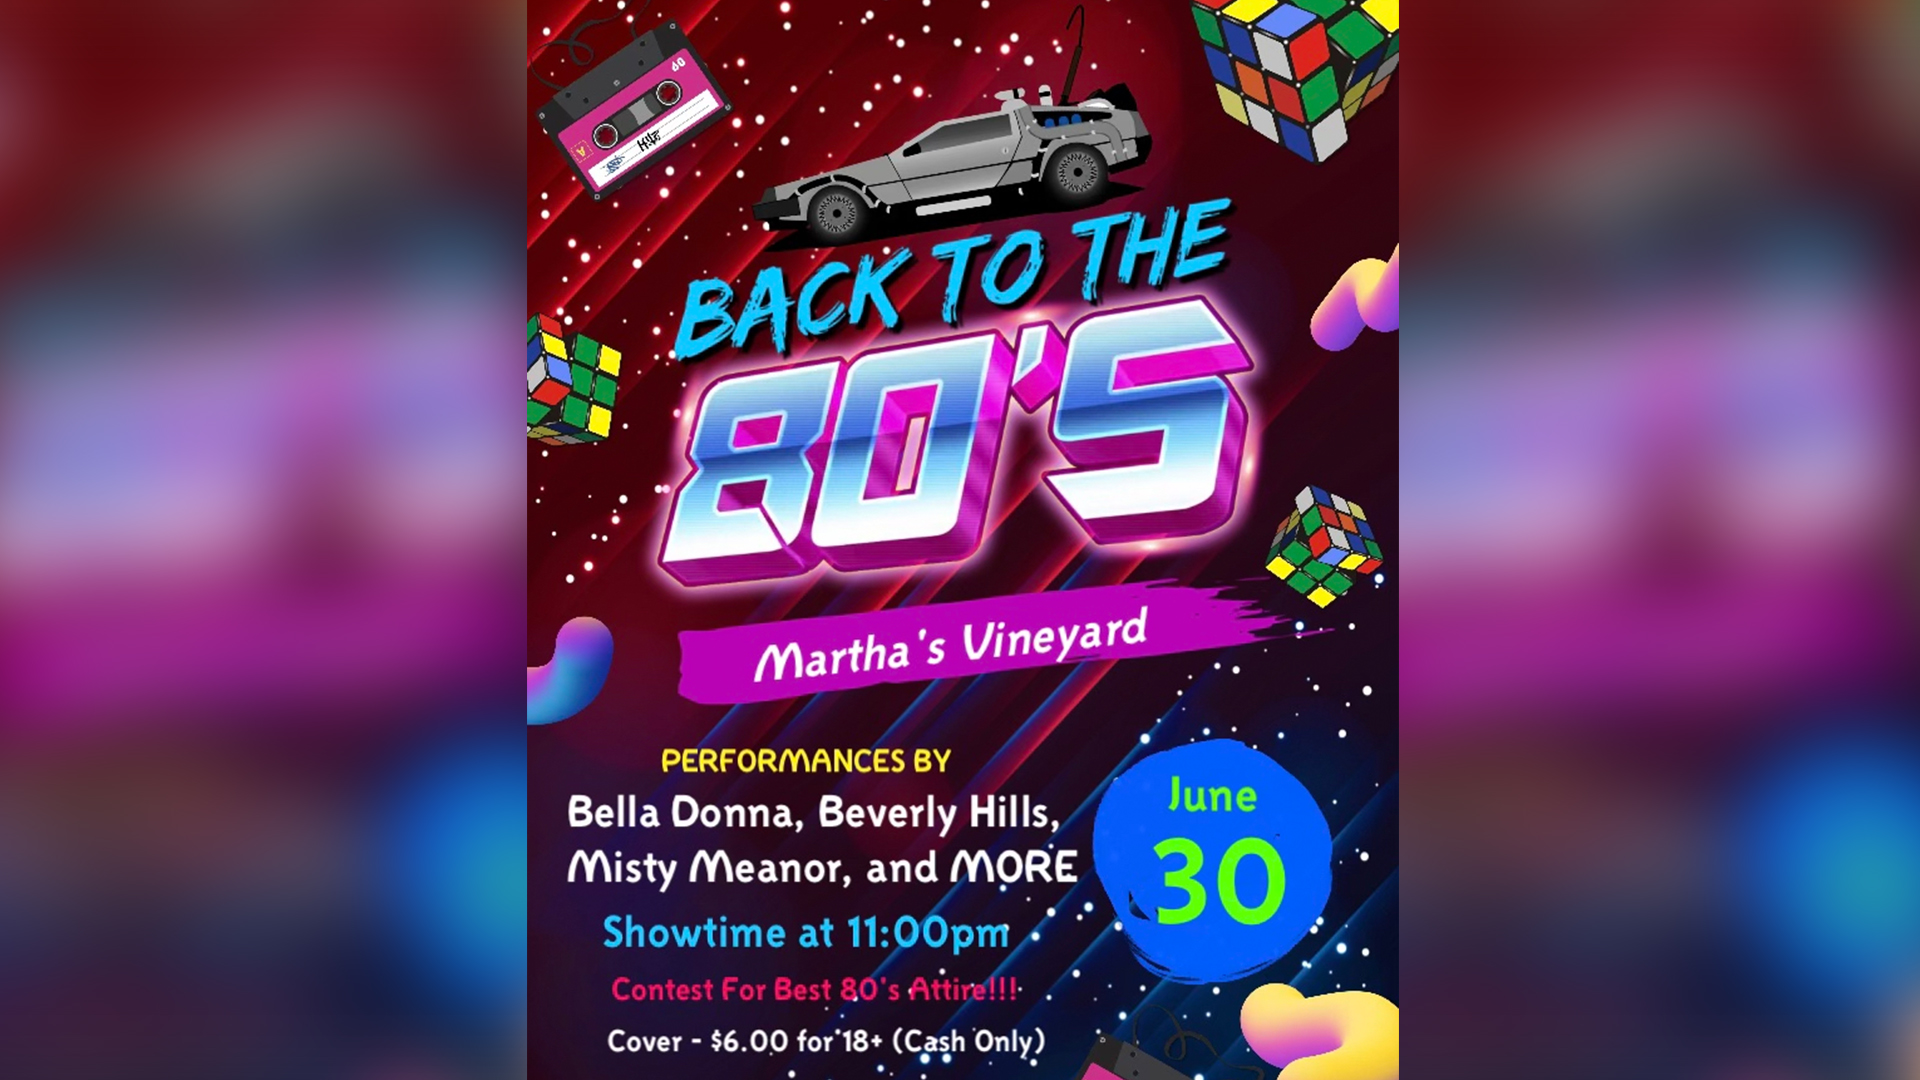 Back to the 80's! at Martha's Vineyard